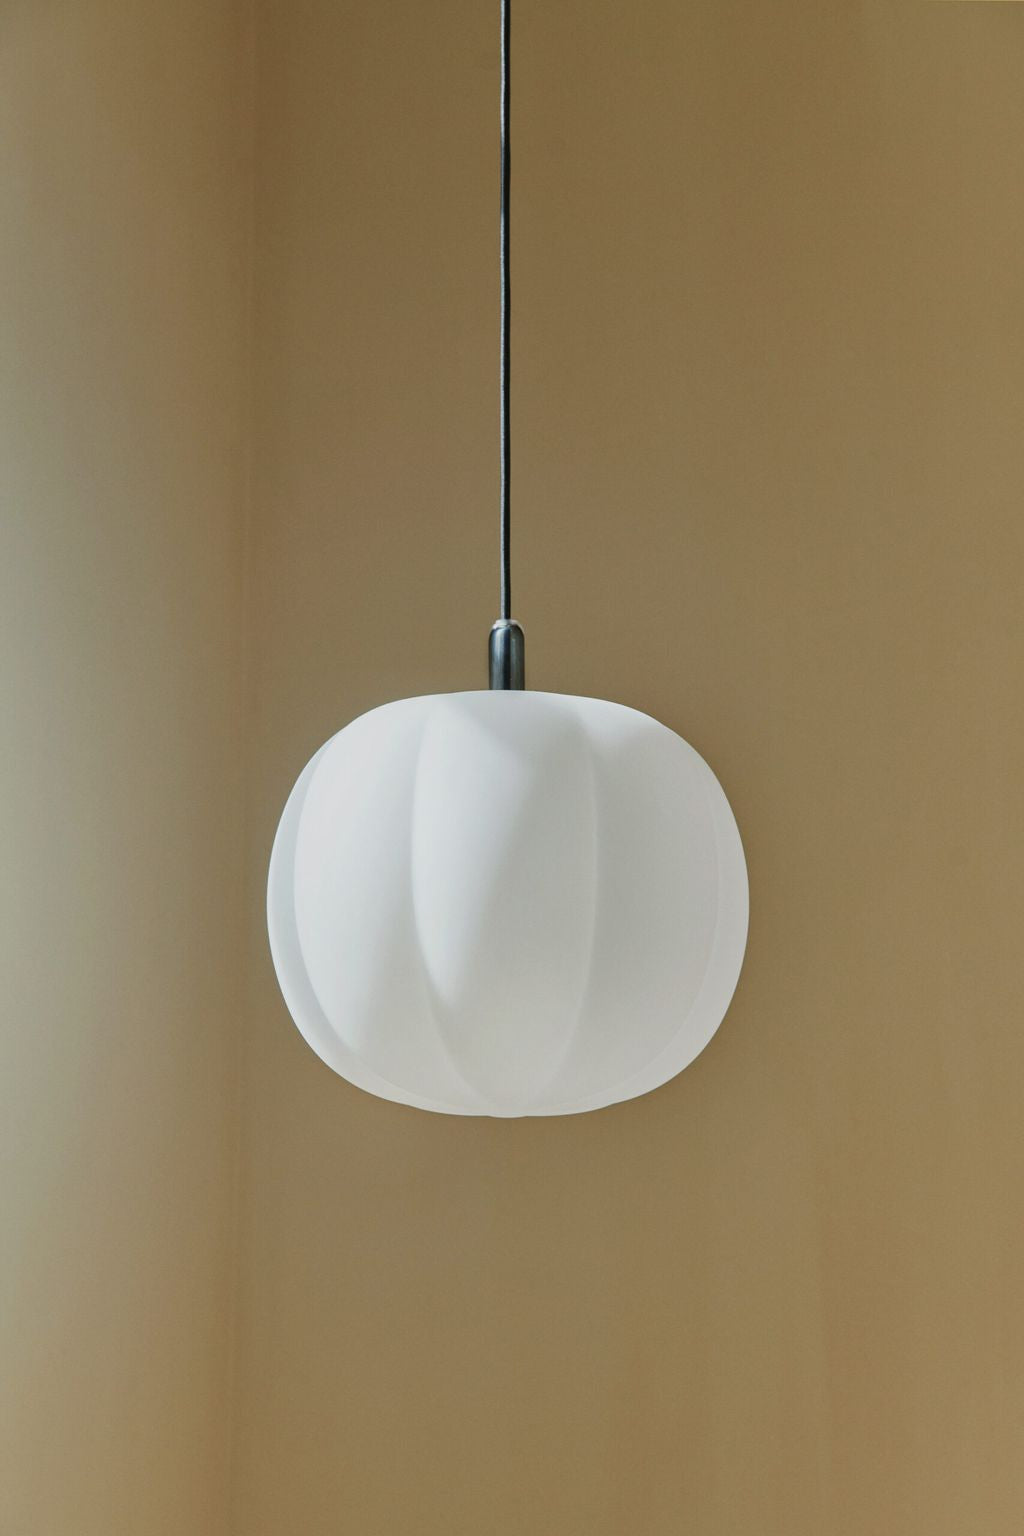 Made By Hand Pepo Pendant Lamp, ø 30